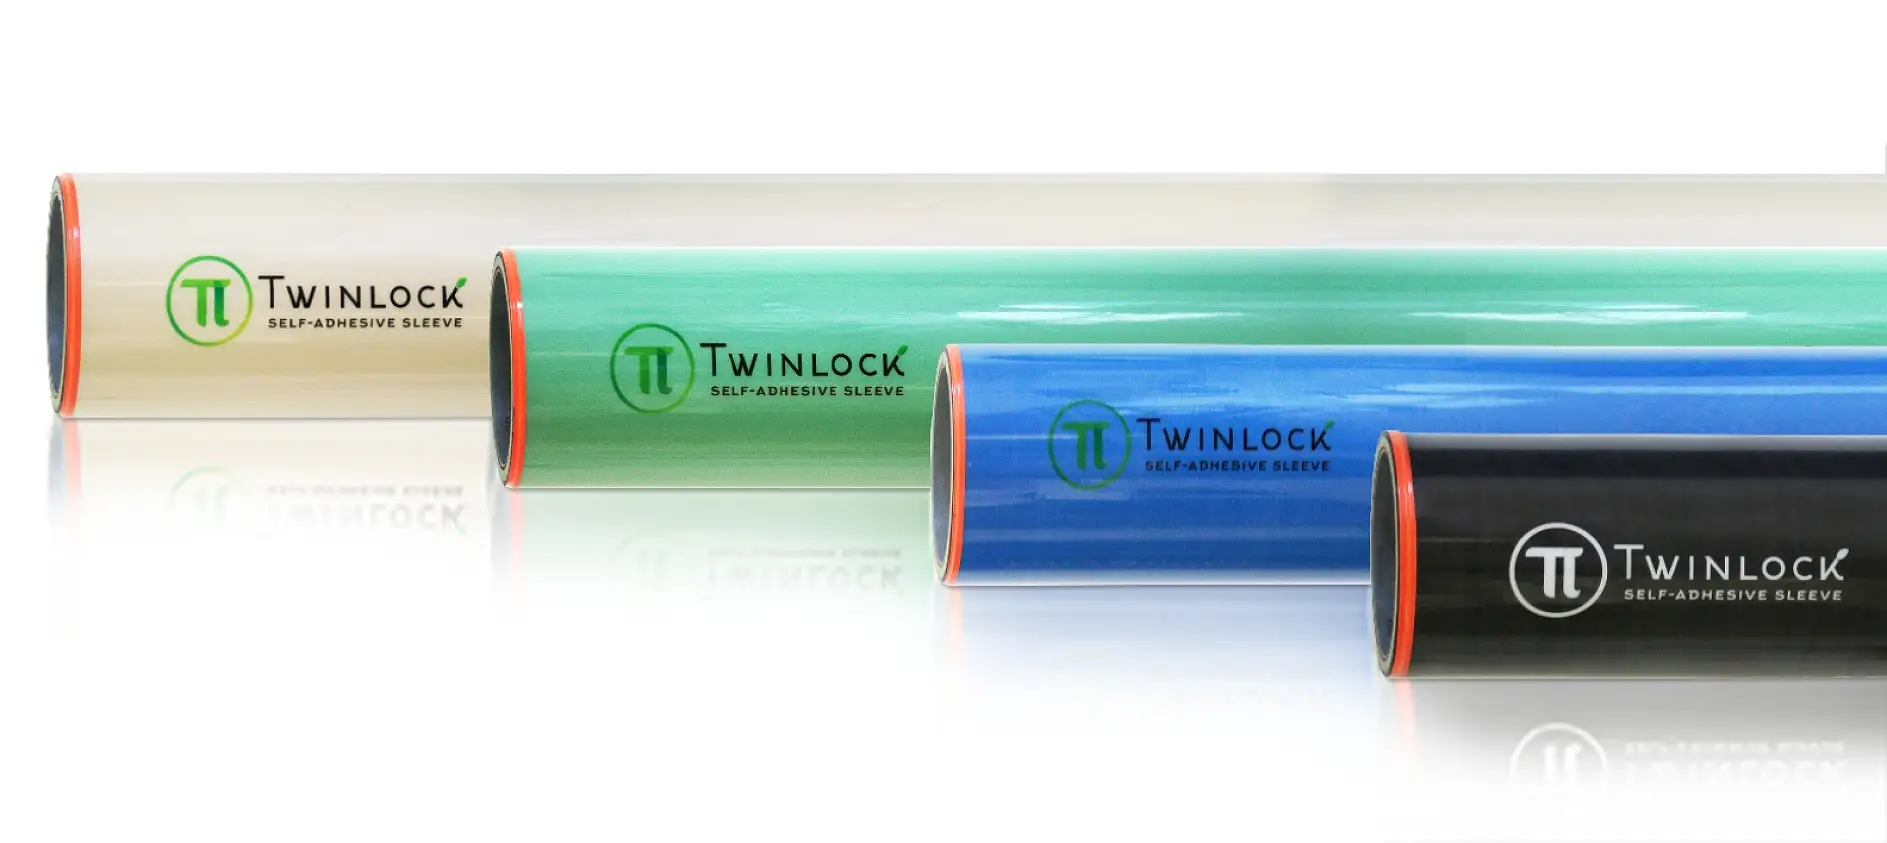 Twinlock is one of three acquisitions in 2018